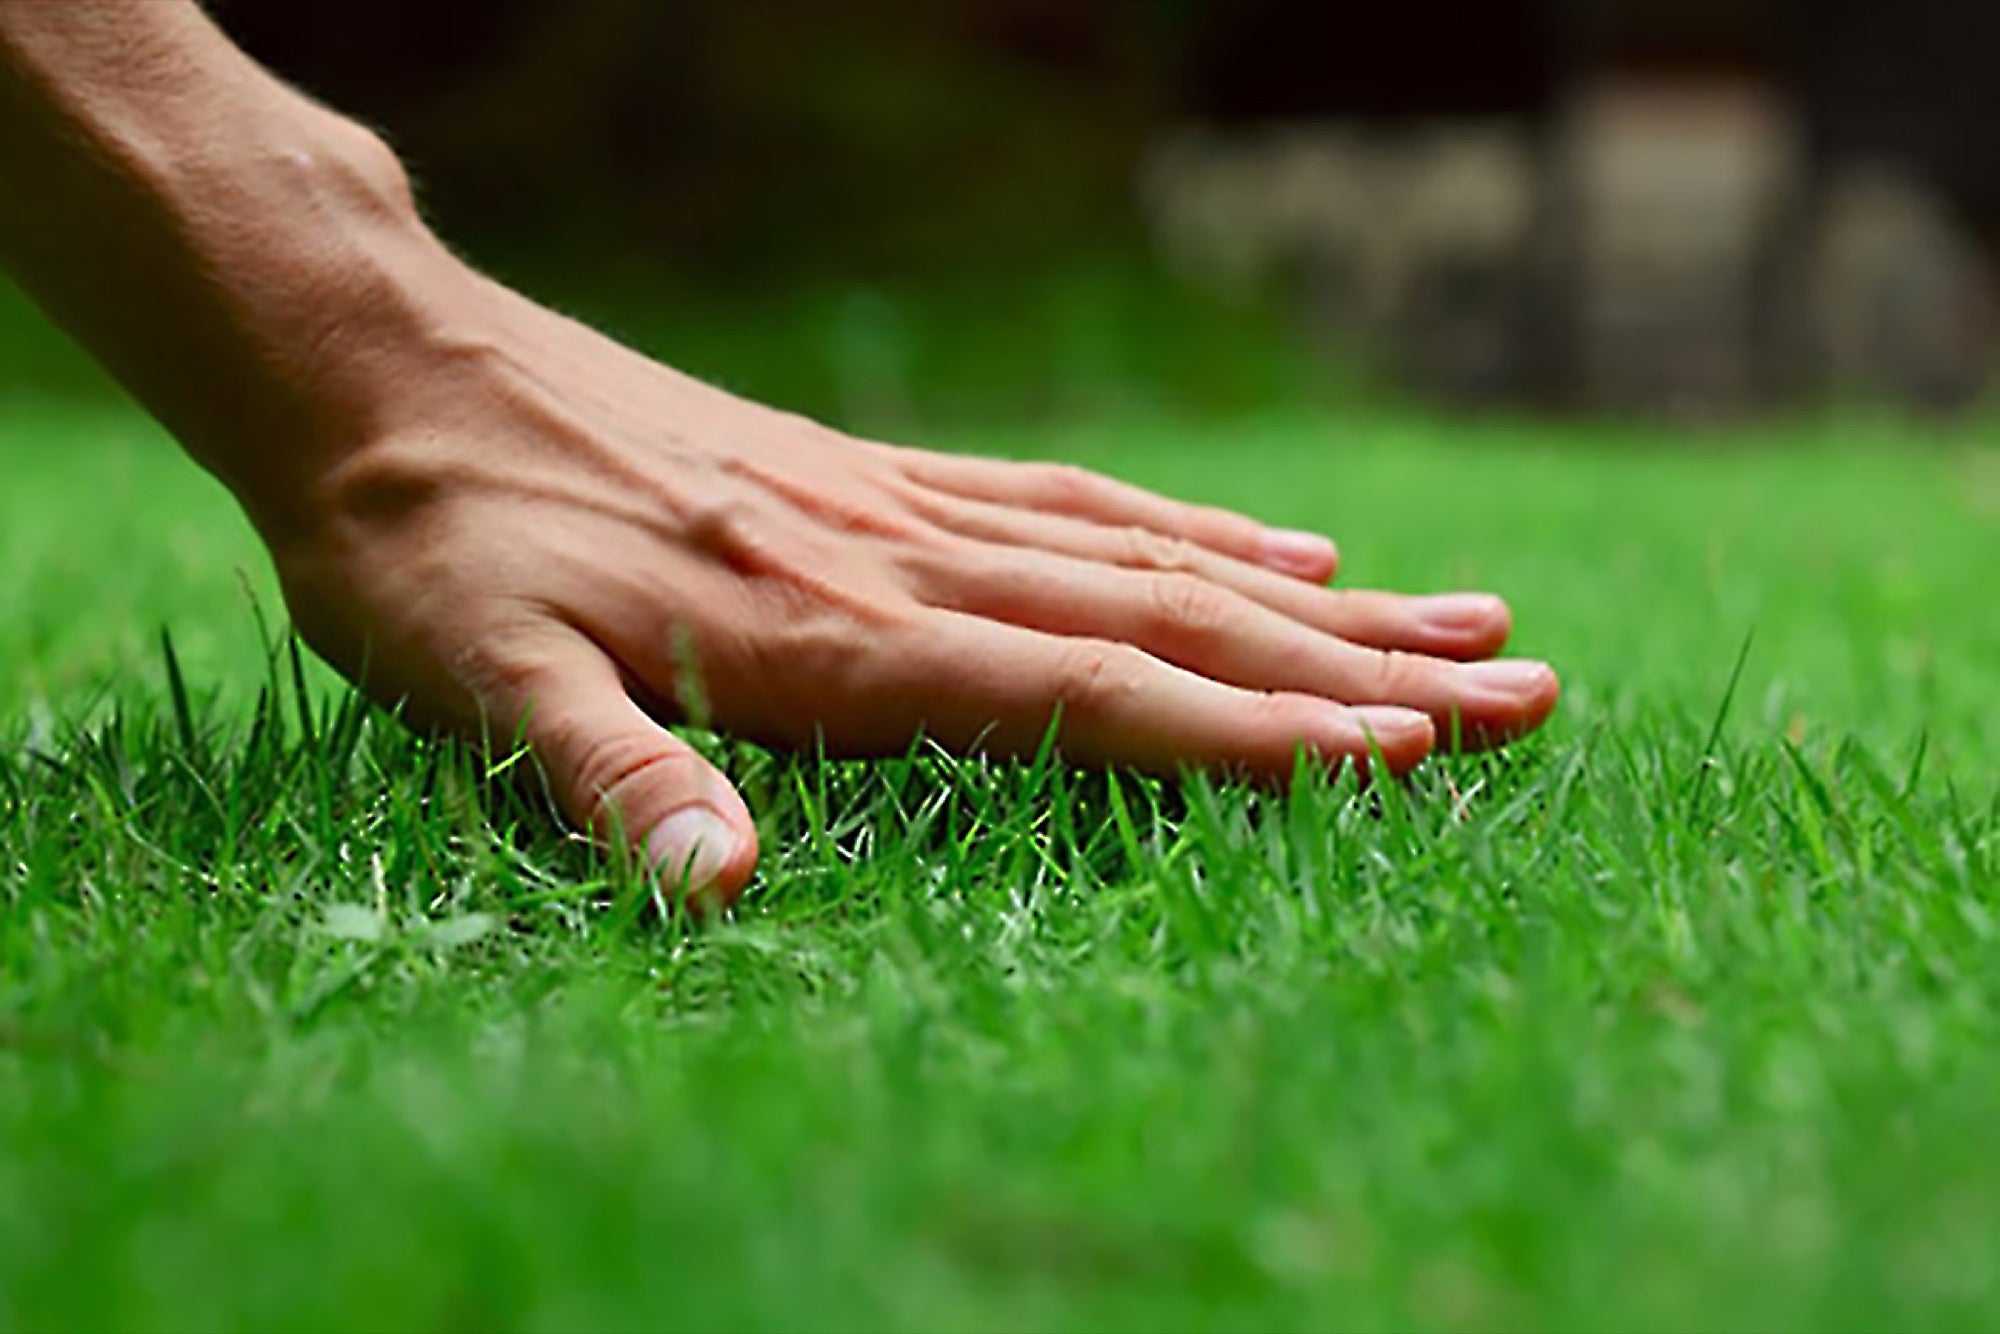 How To Choose Good Lawn Care Products